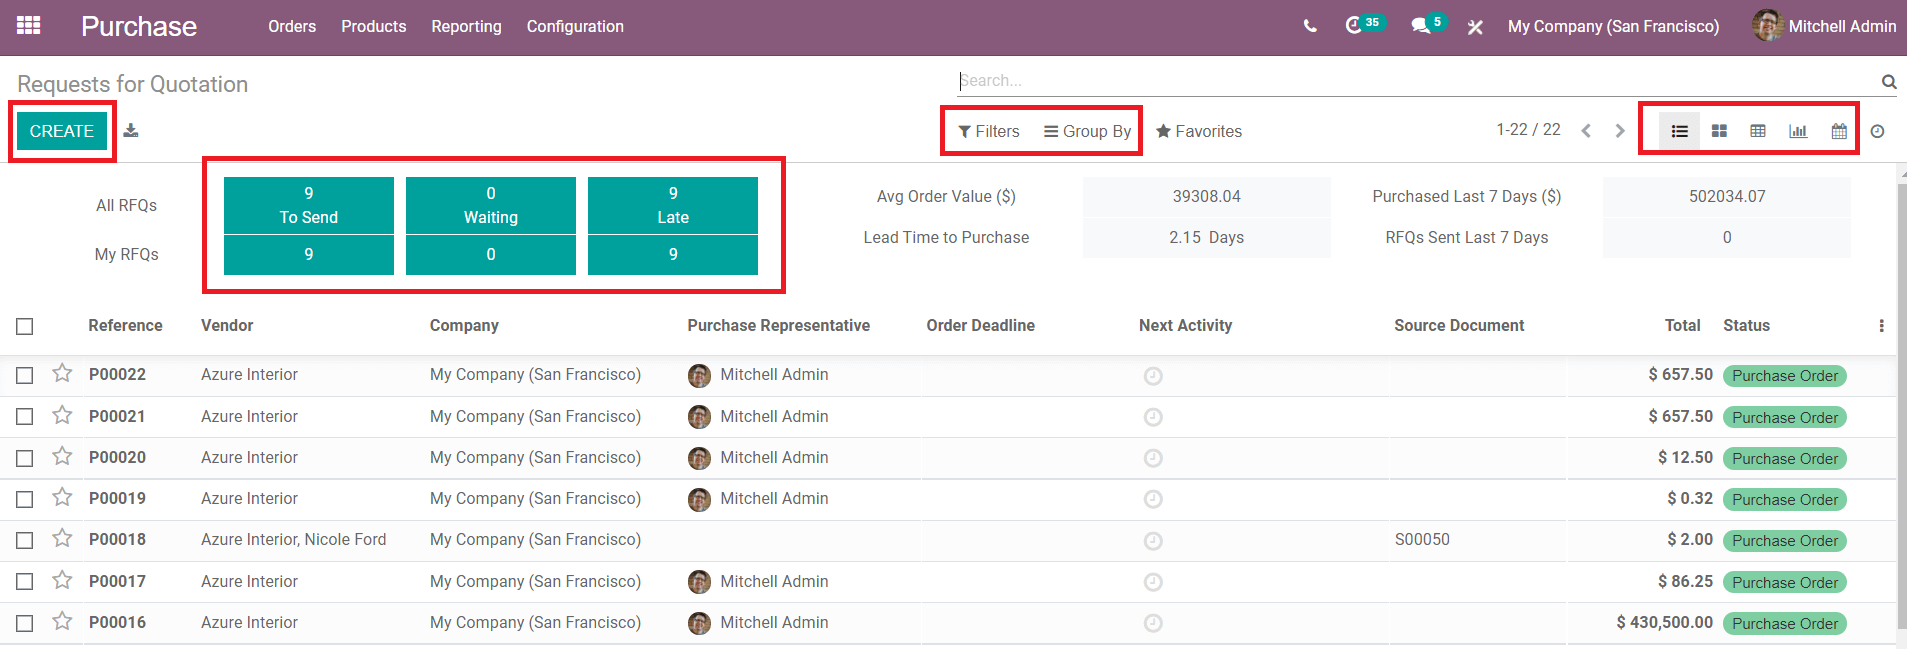 how-to-create-a-request-for-quotation-in-the-odoo-purchase-module